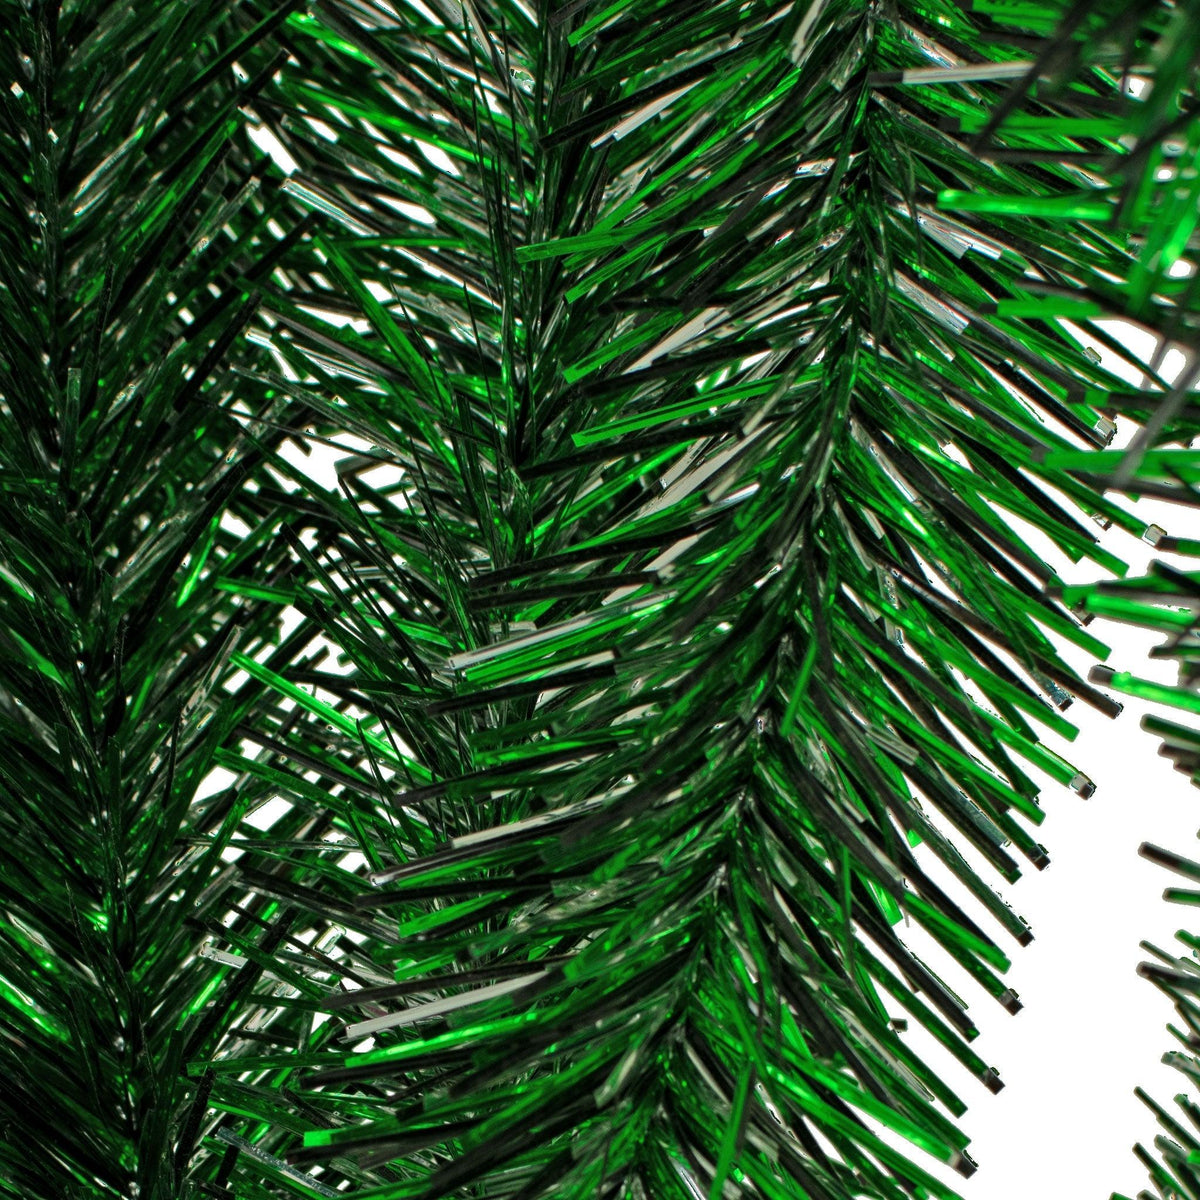 Lee Display's Green Silver and Black Tinsel Garlands sold in 25ft lengths at leedisplay.com